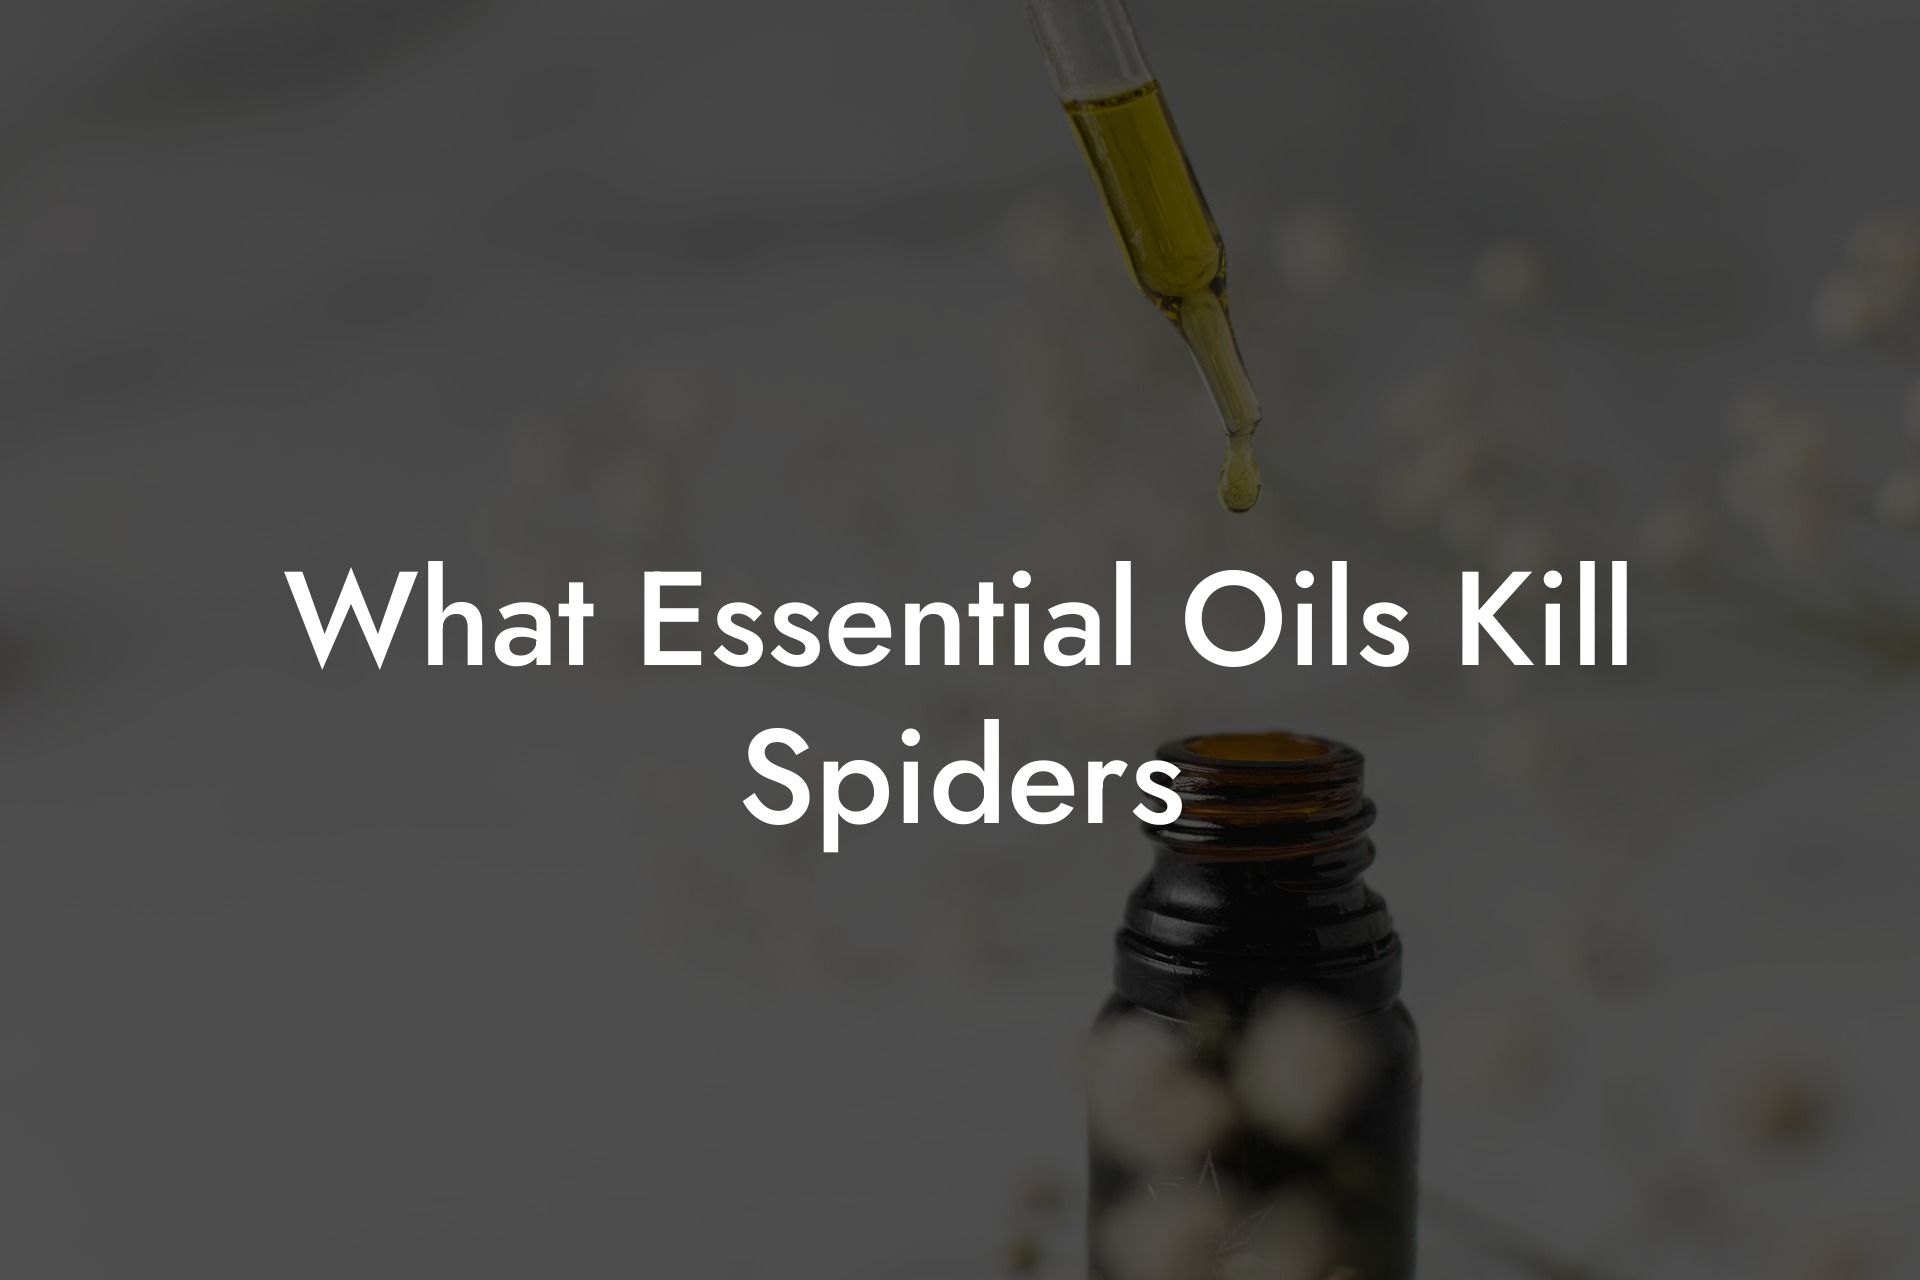 What Essential Oils Kill Spiders